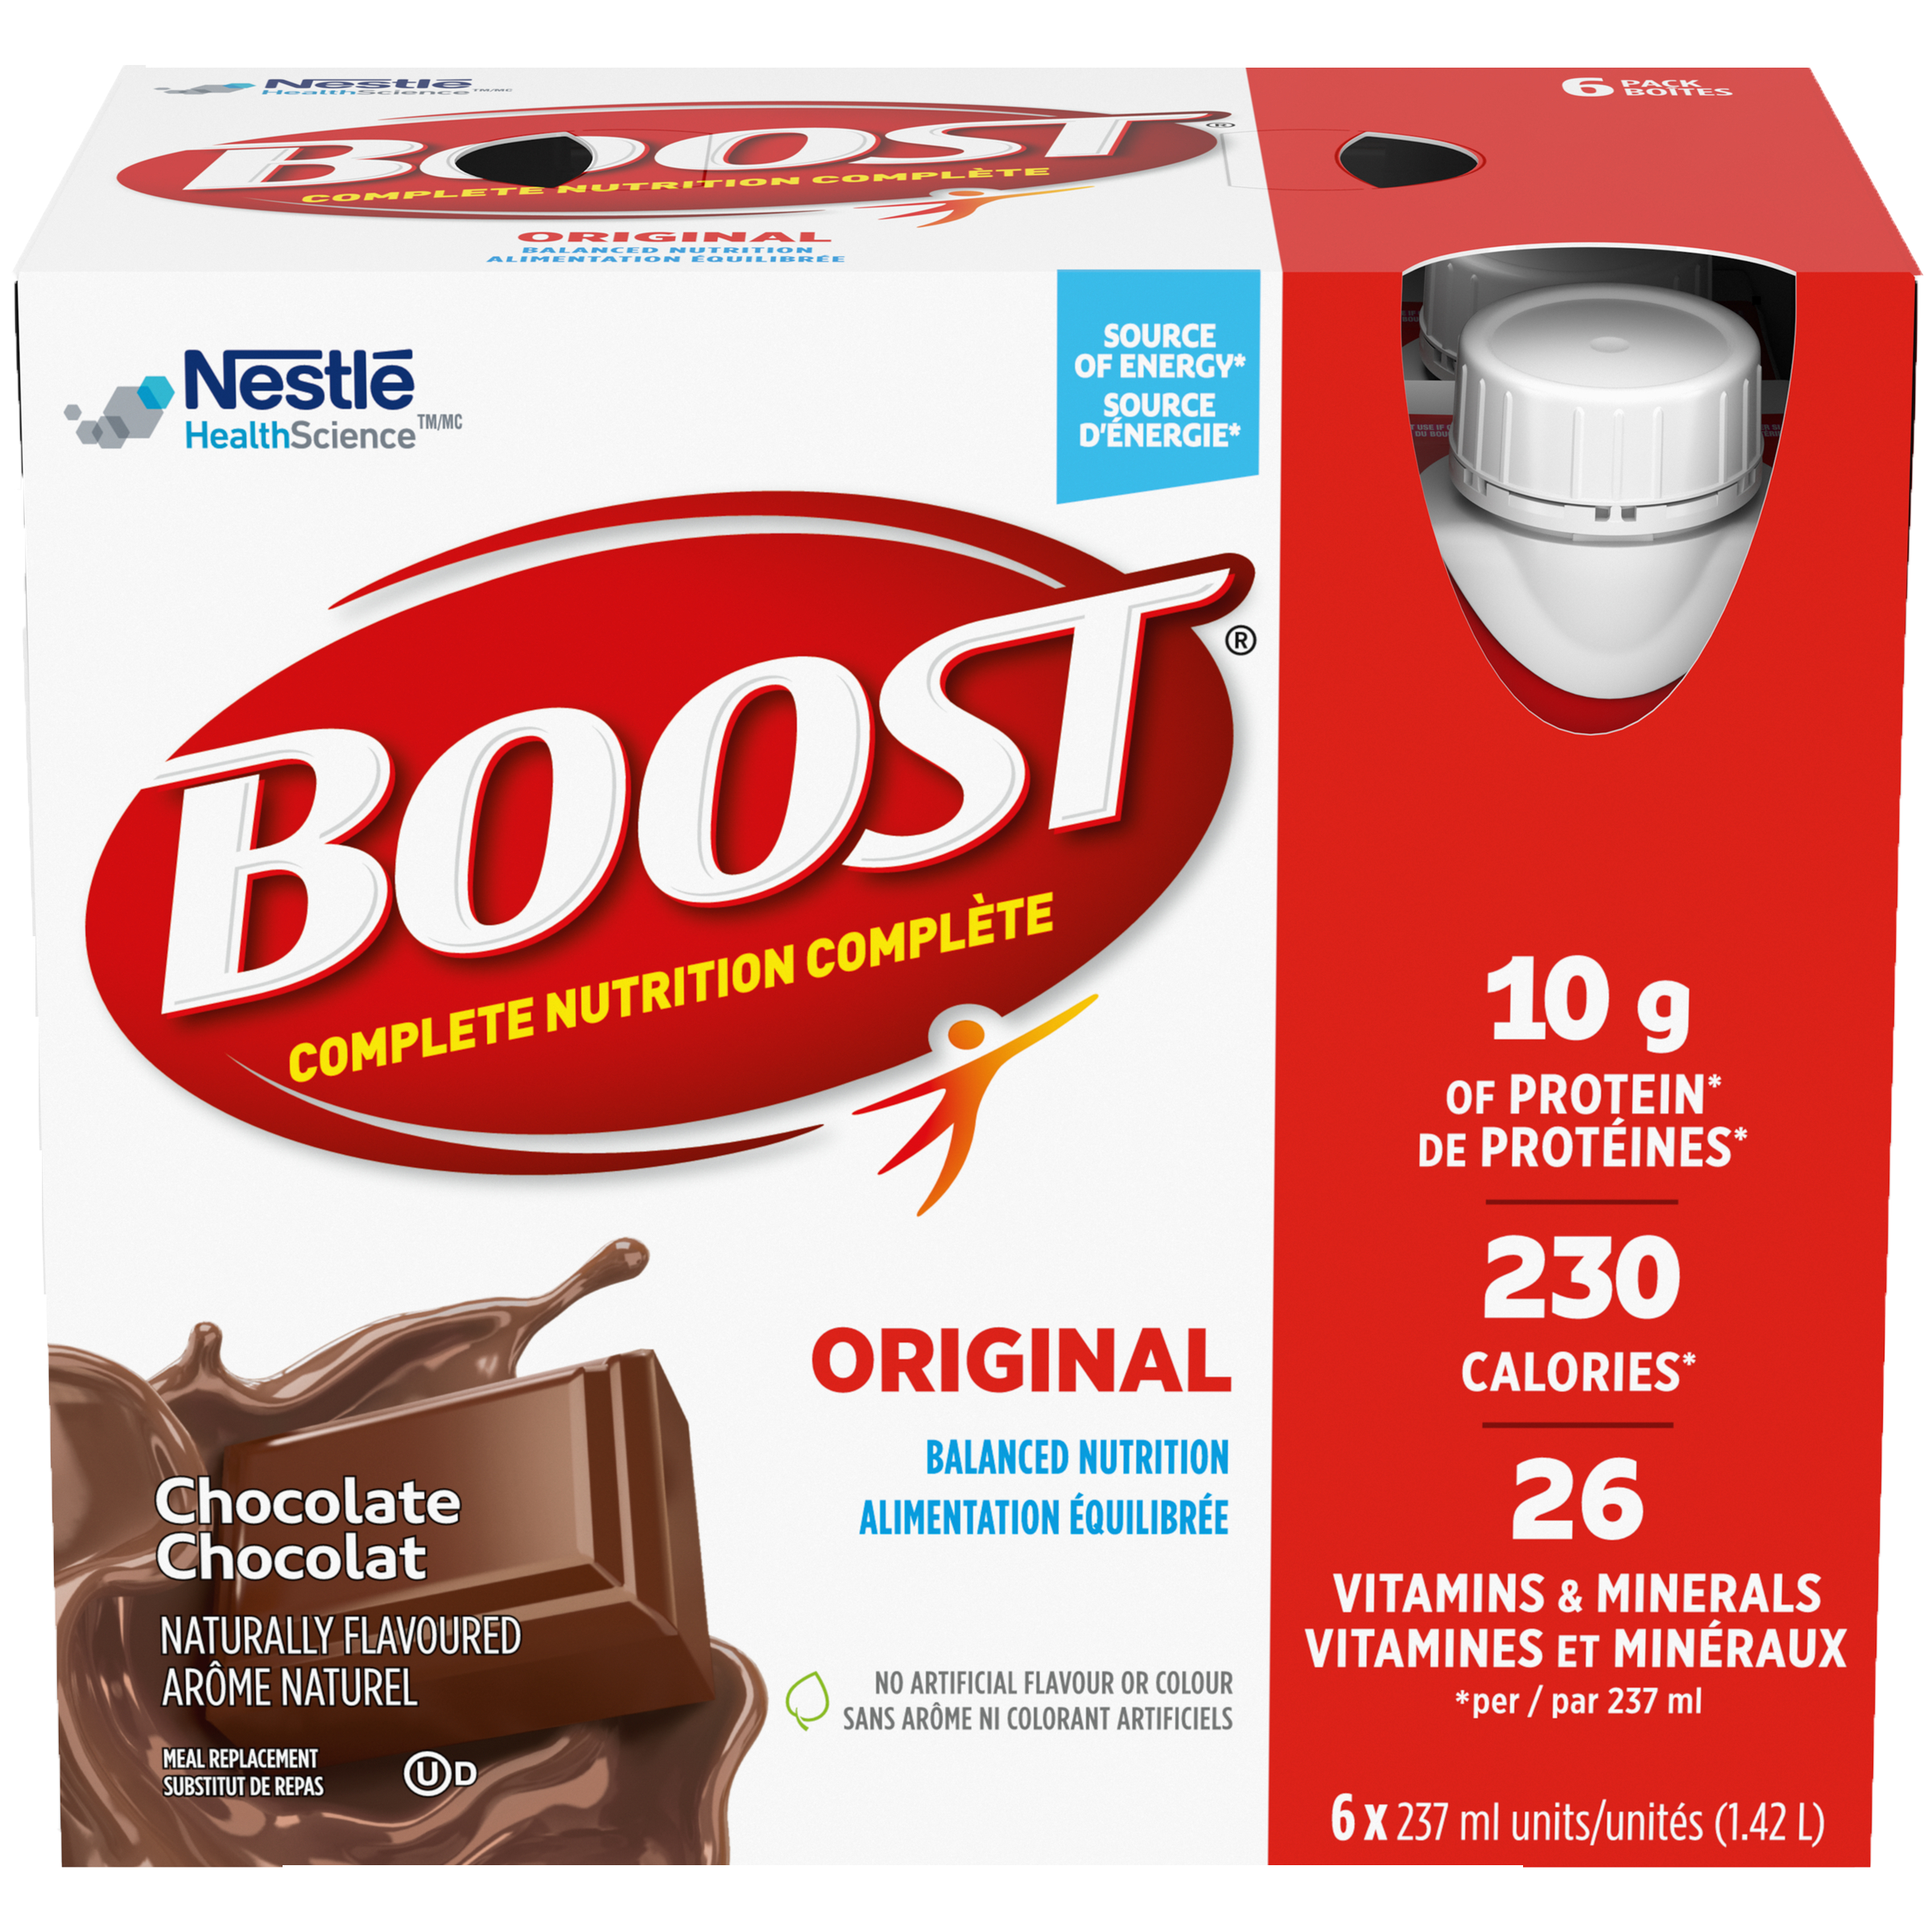 BOOST Chocolate Meal Replacement